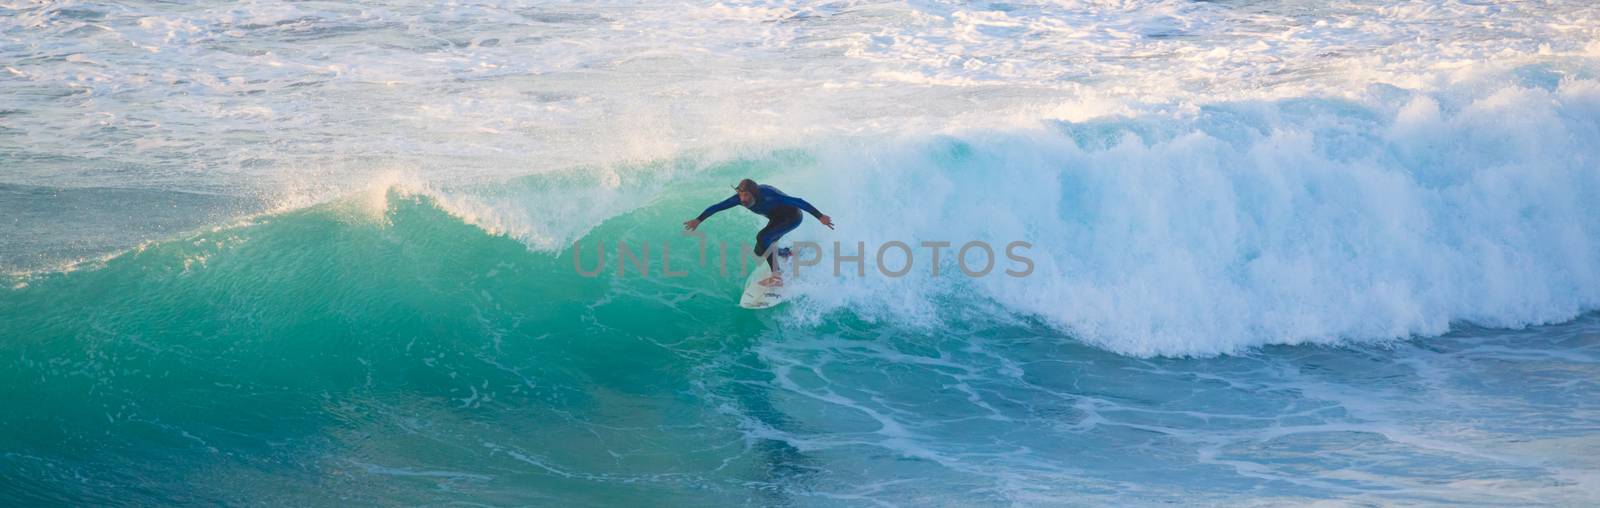 Senior surfer riding a perfect wave. by kasto